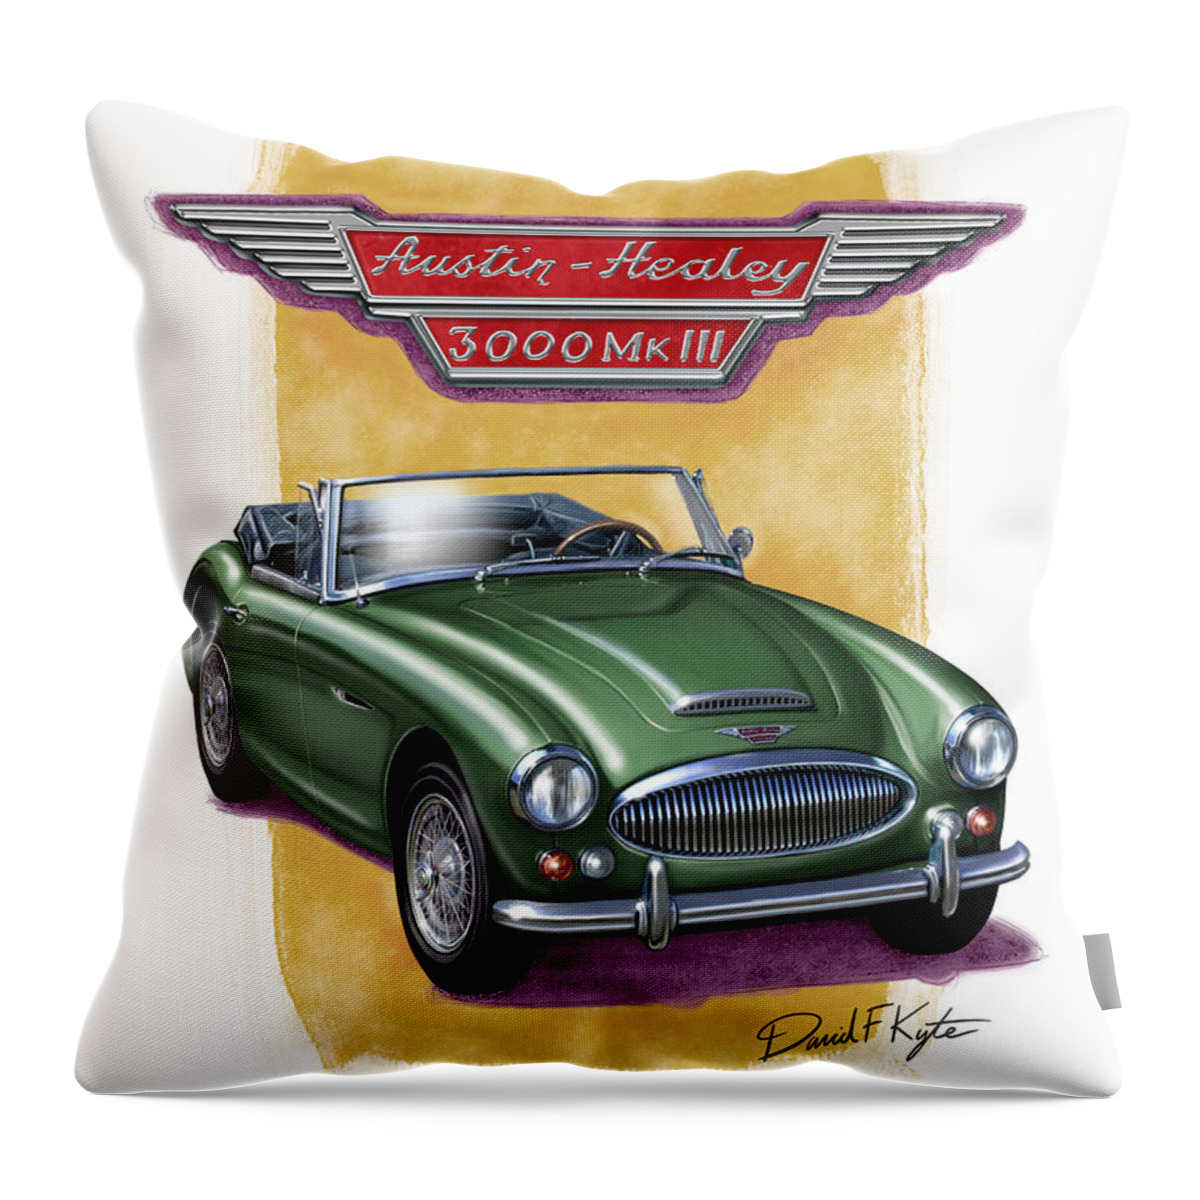 Highly Detailed Painting Captures The Beauty Of This 1960s Era Austin Healey 3000mk3 In British Racing Green. See Other Listings For Other Color Combinations And Two Tone Options. Also Other English Sports Cars. Special Color On Request. Throw Pillow featuring the painting Austin3000-brg by David Kyte